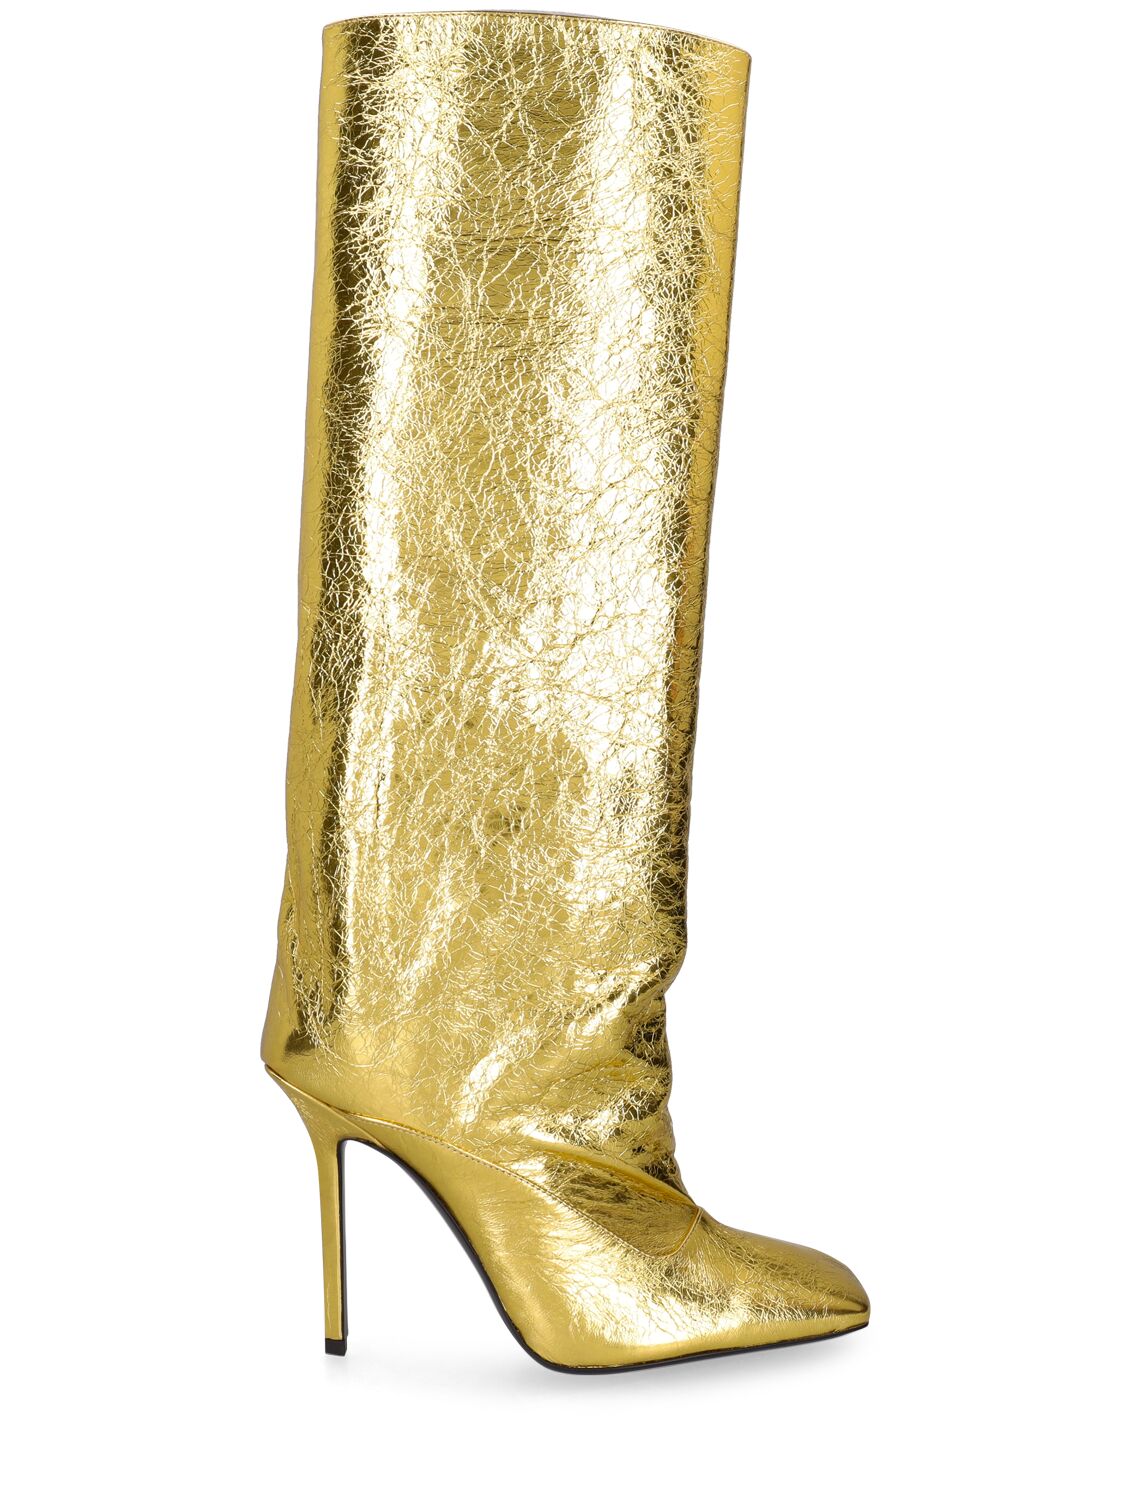 Image of 105mm Sienna Laminated Leather Tall Boot